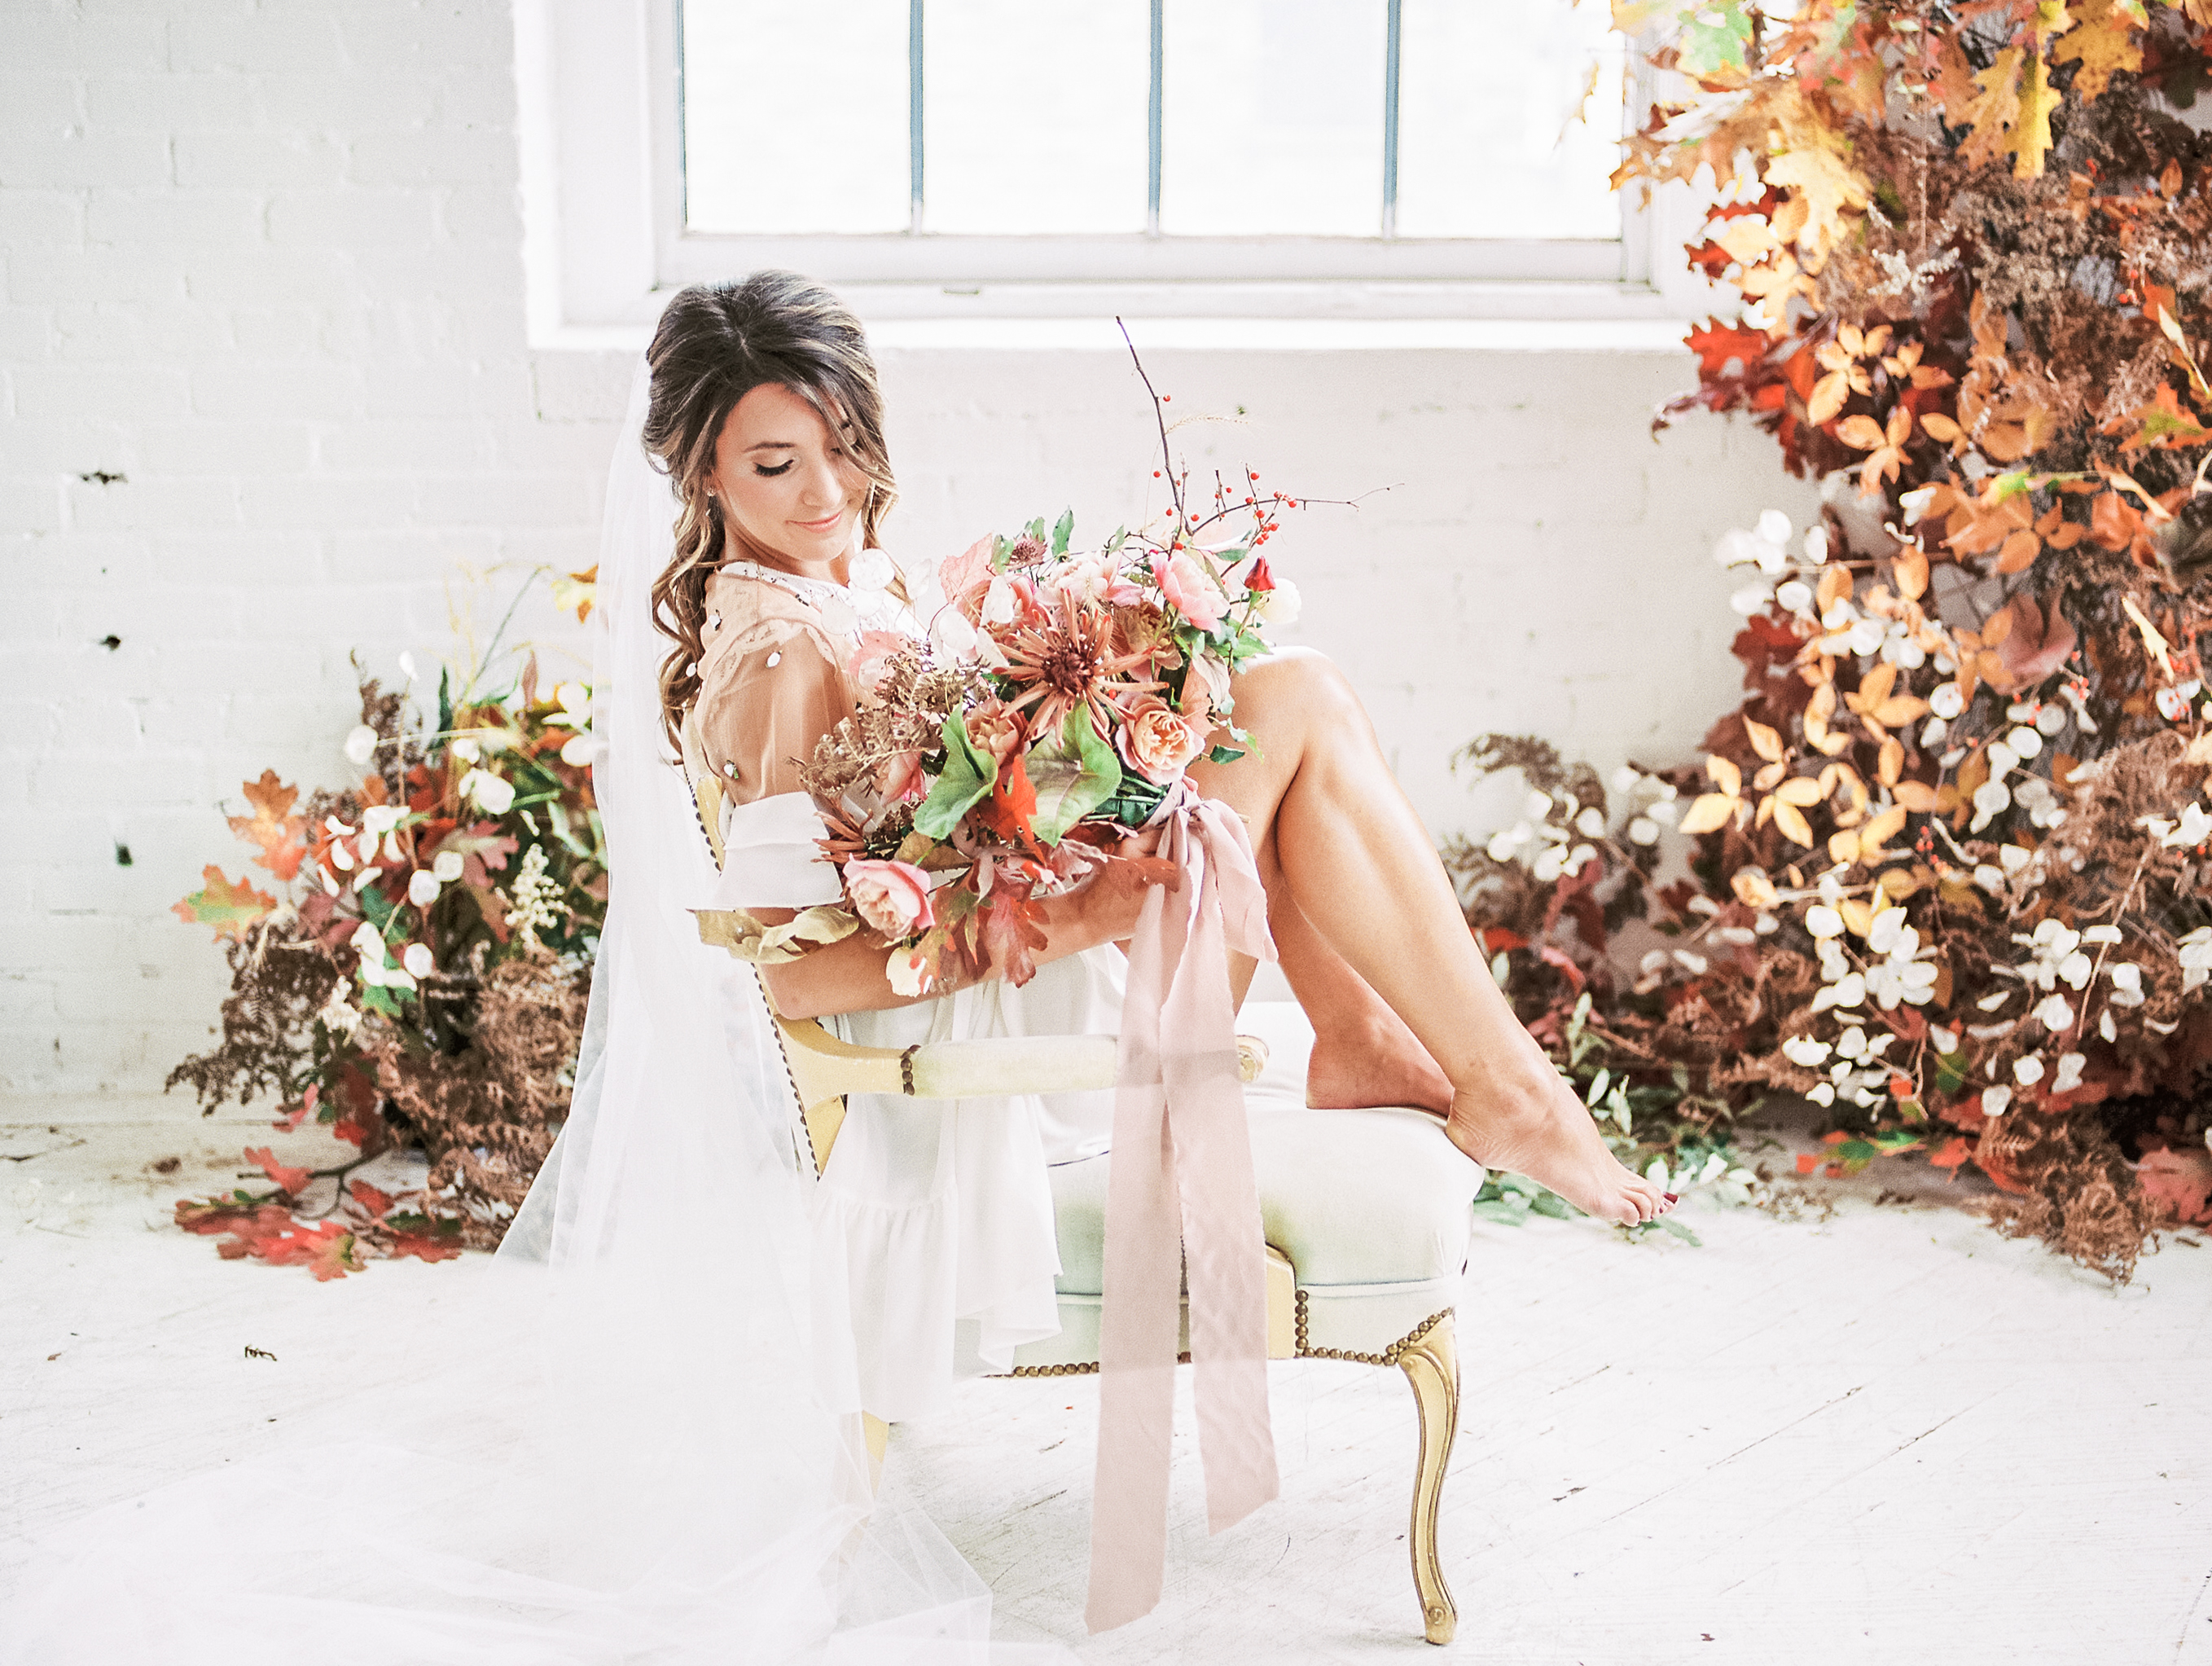 Autumn Editorial | The Day's Design | Samantha James Phtoography